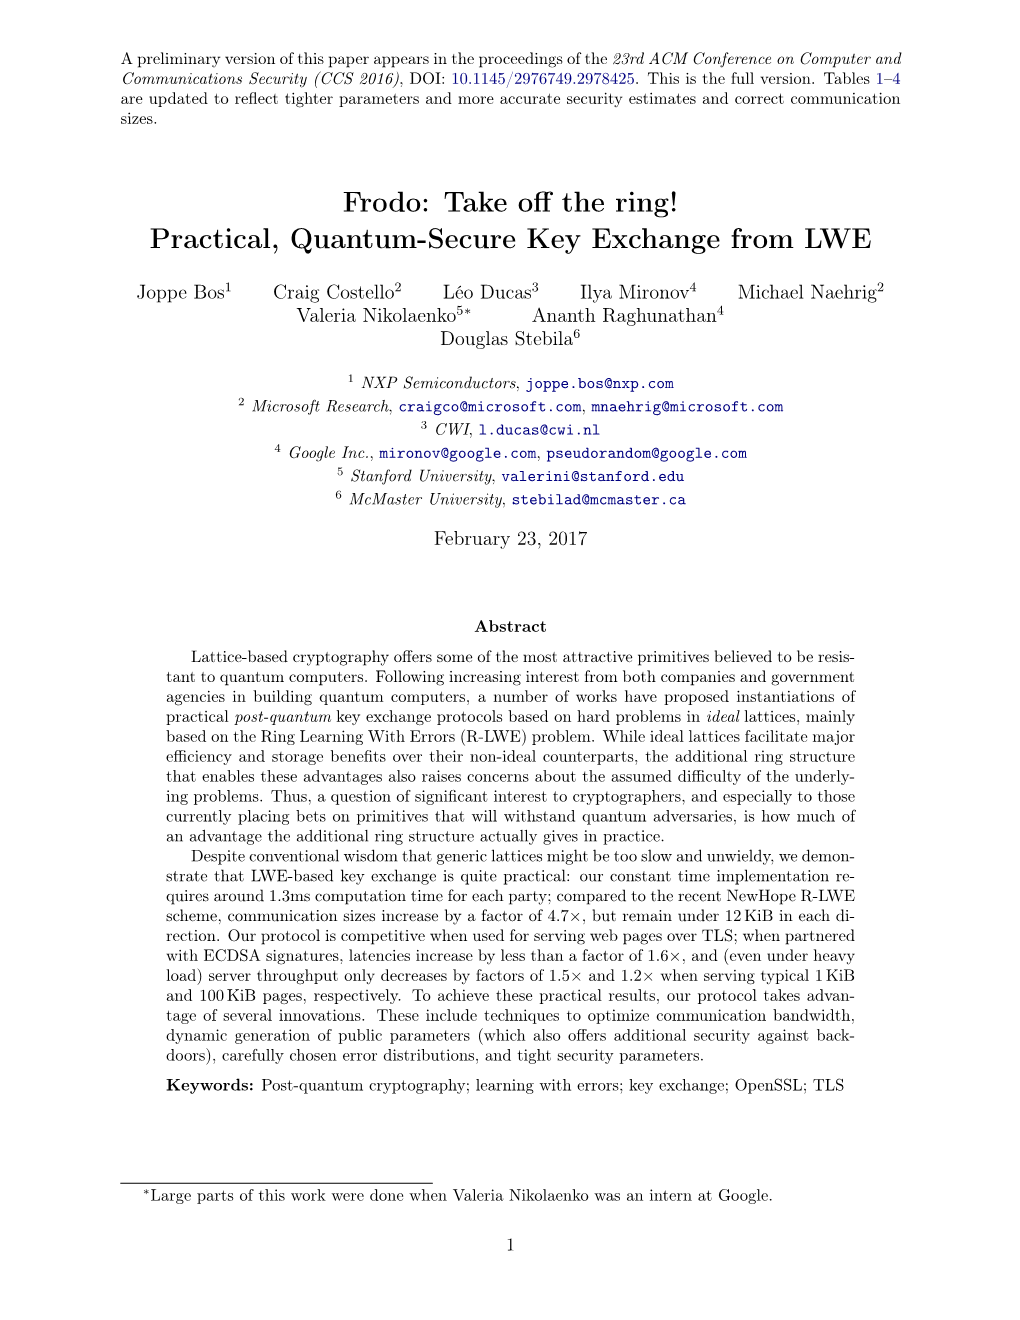 Frodo: Take Off the Ring! Practical, Quantum-Secure Key Exchange